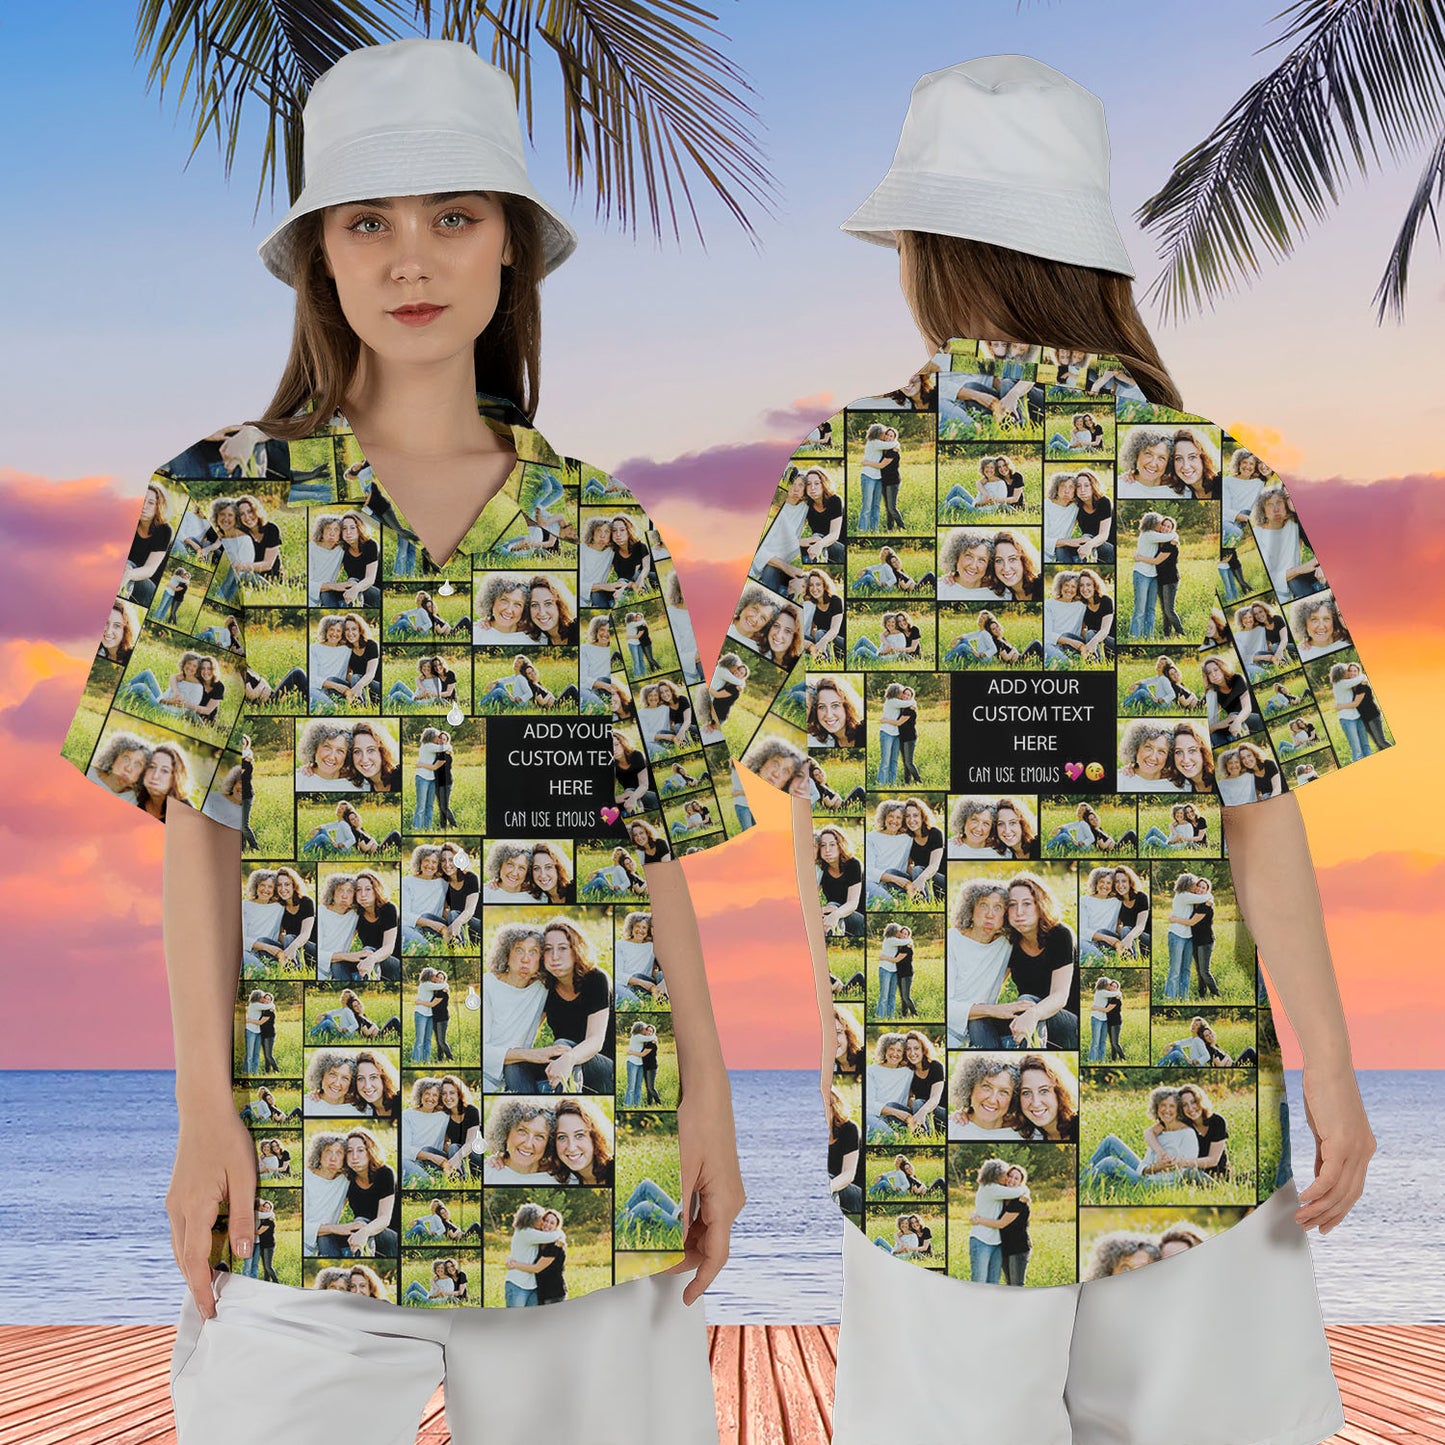 Create a Mother's Day Gift for Mom with Collage Photo & Text on Unisex Hawaiian Shirt